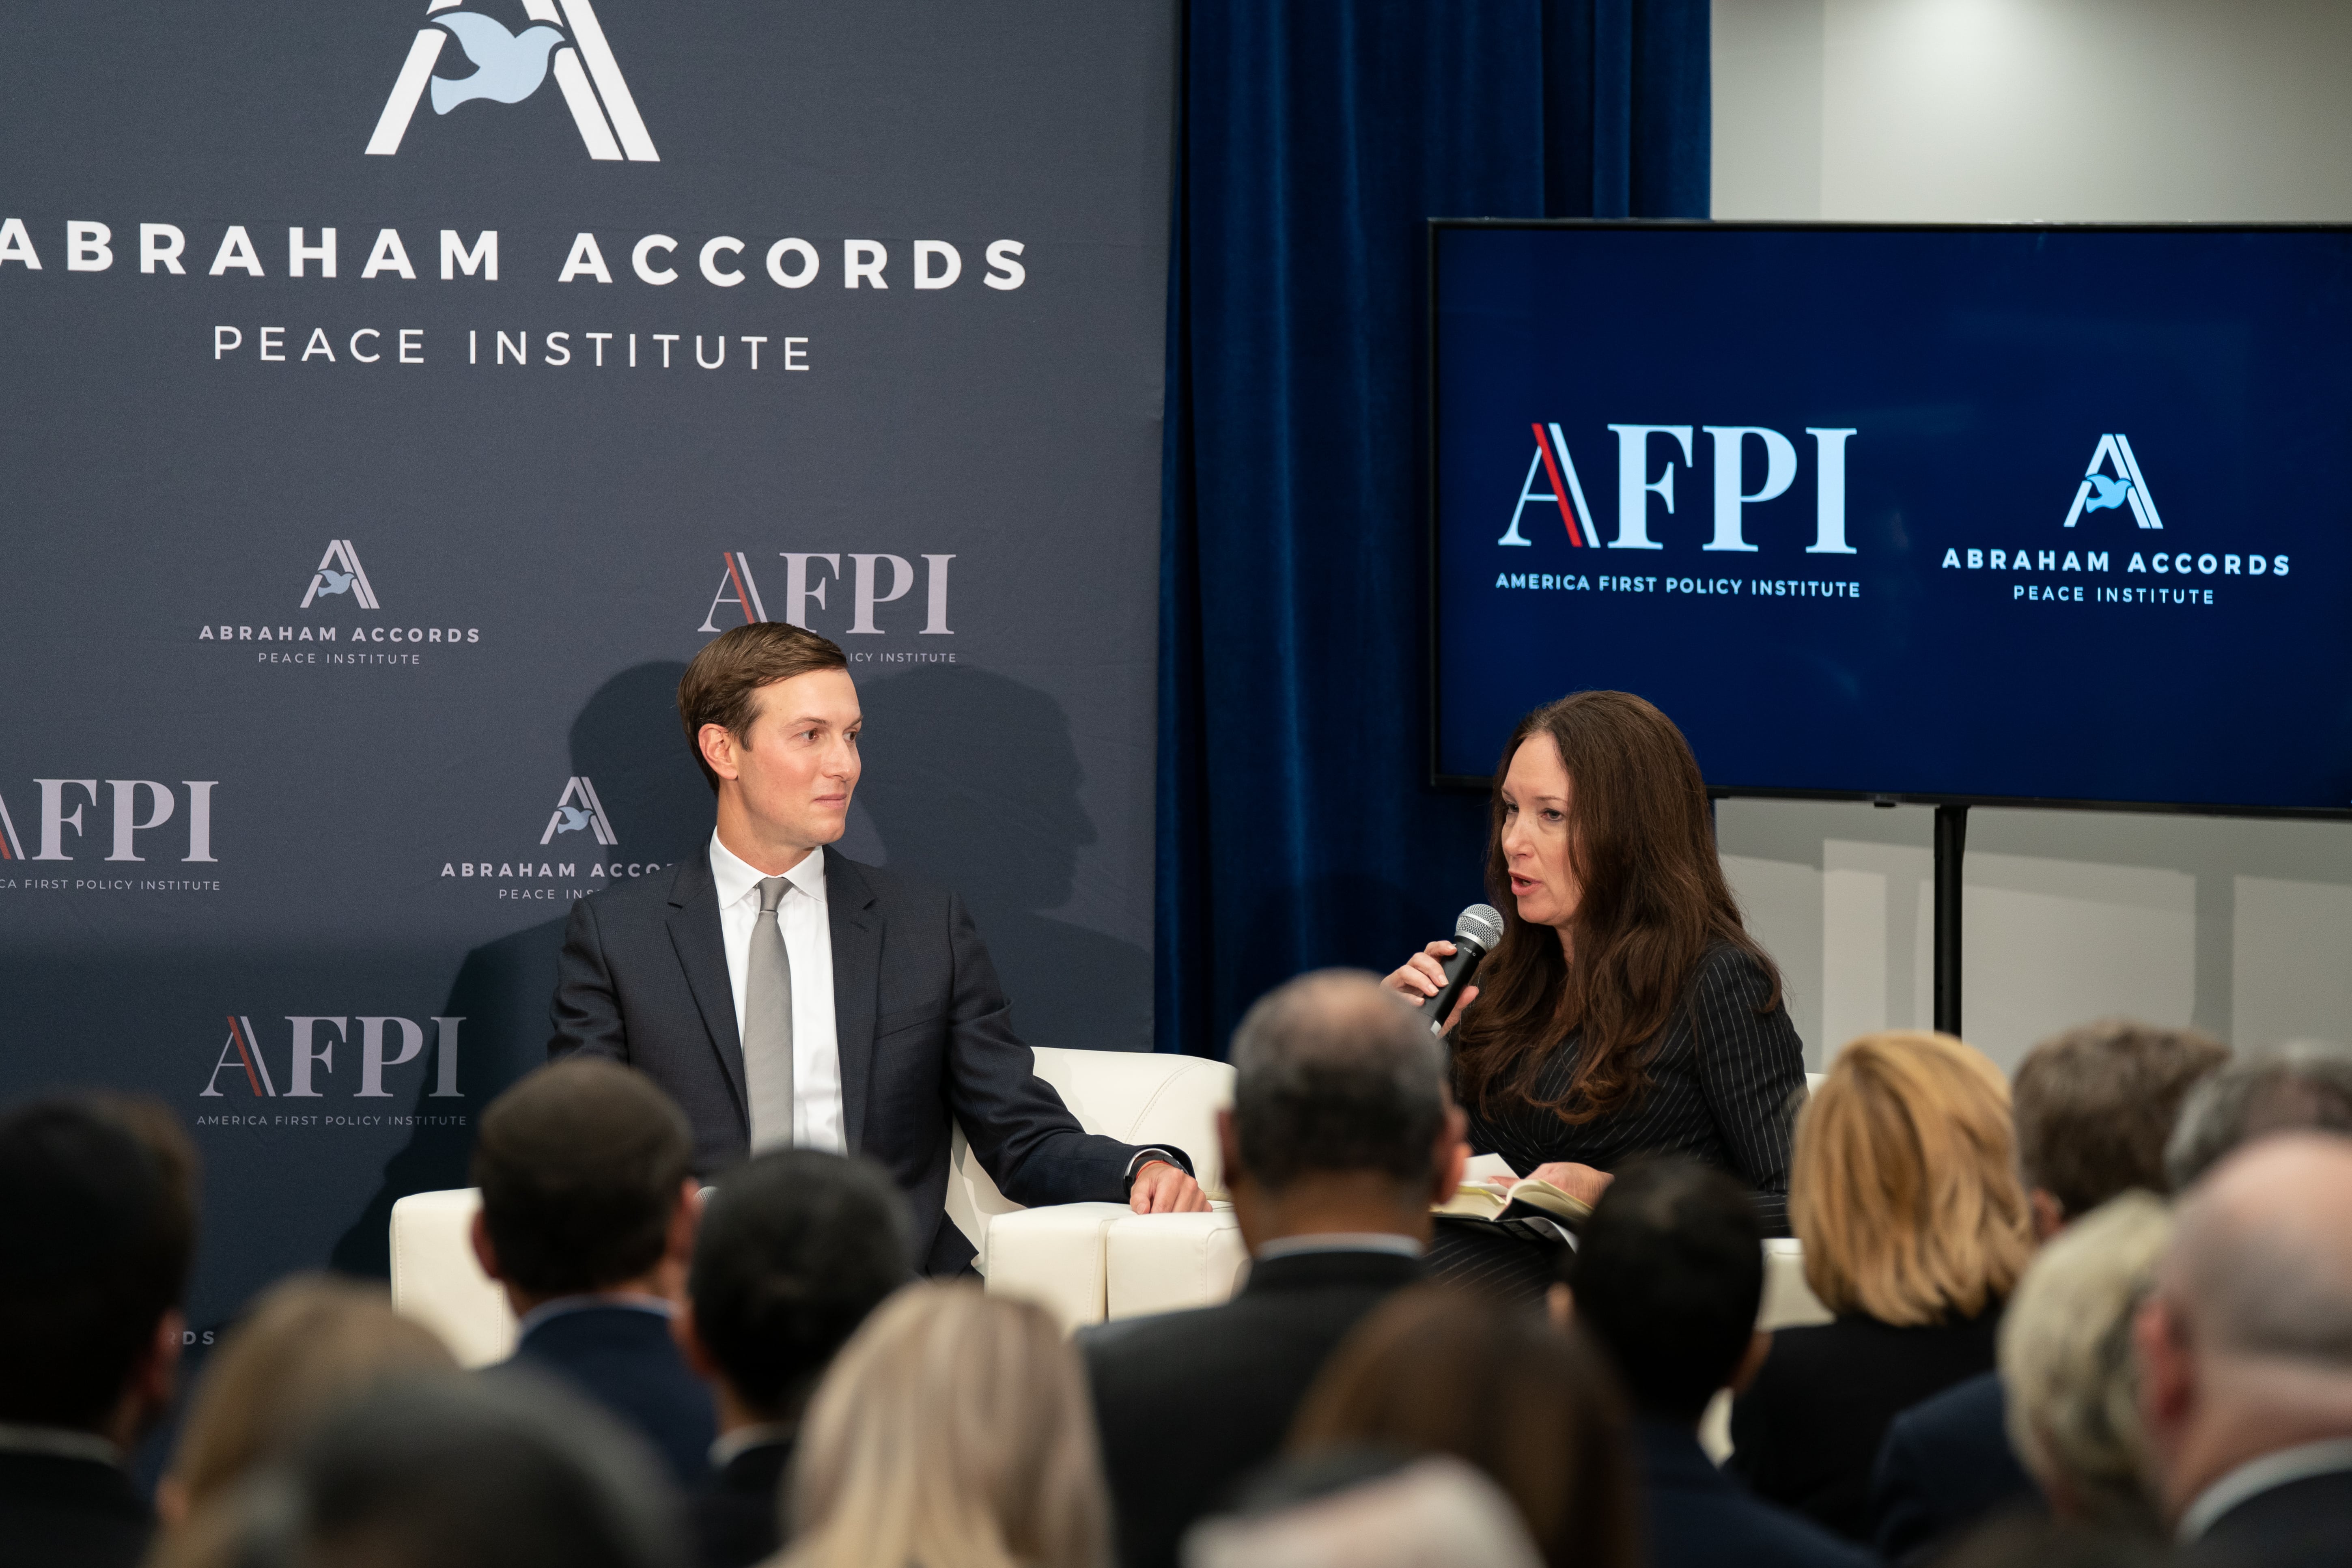 In a fireside conversation, Jared Kushner discusses the Abraham Accords with AFPI's Brooke Rollins.